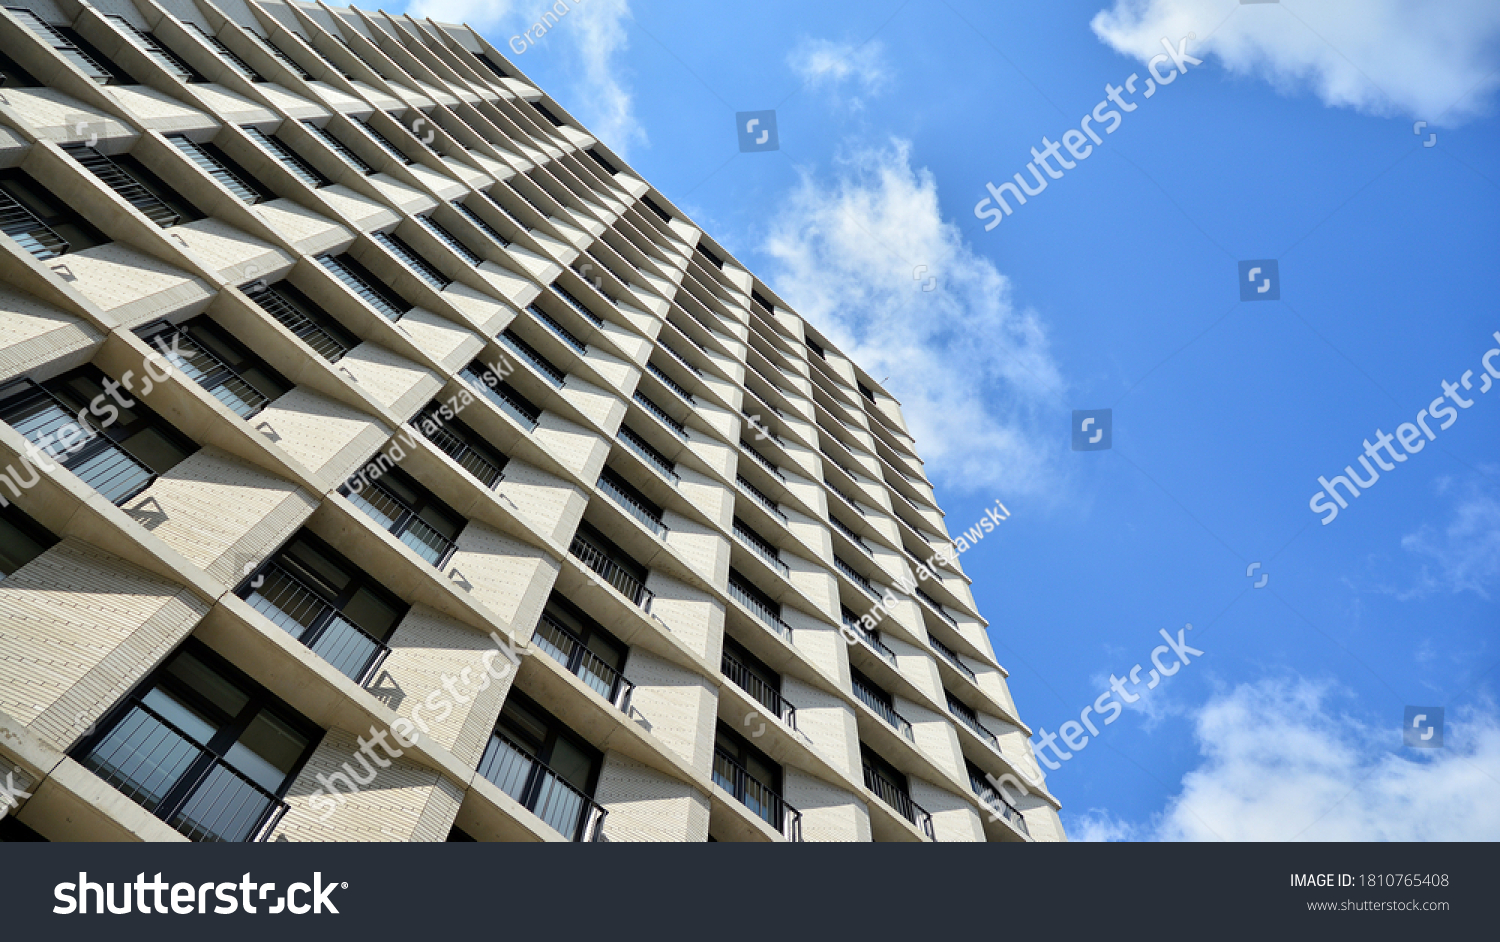 Exterior of a modern multi-story apartment building - facade, windows and balconies. #1810765408